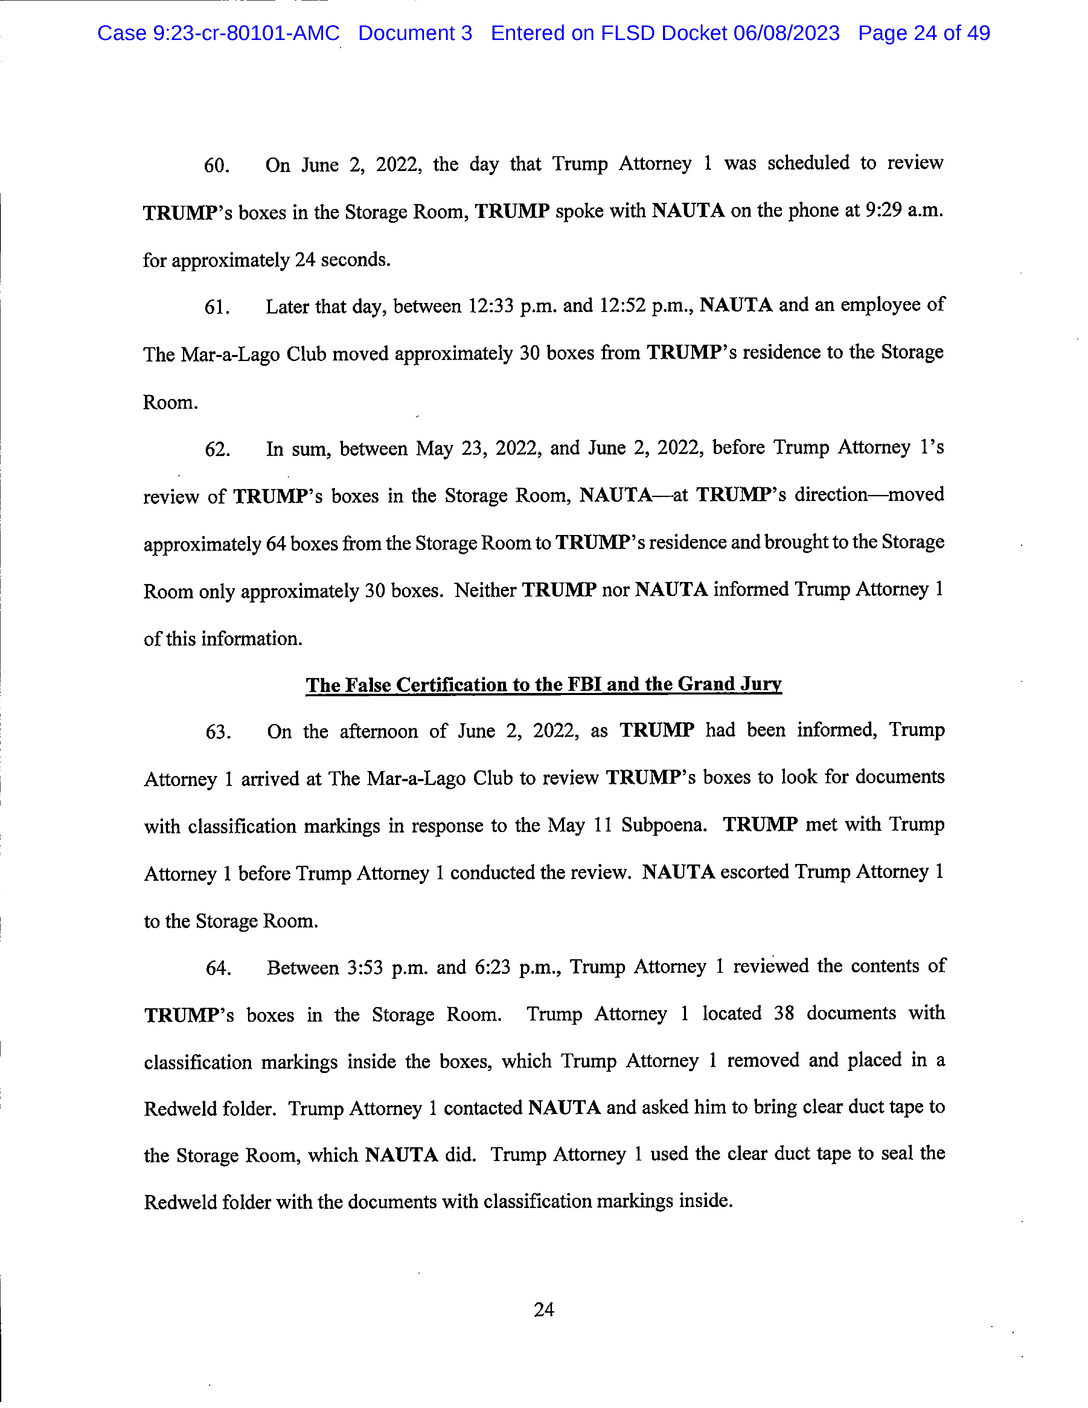 Page 24 of Donald Trump Classified Documents Indictment PDF document.